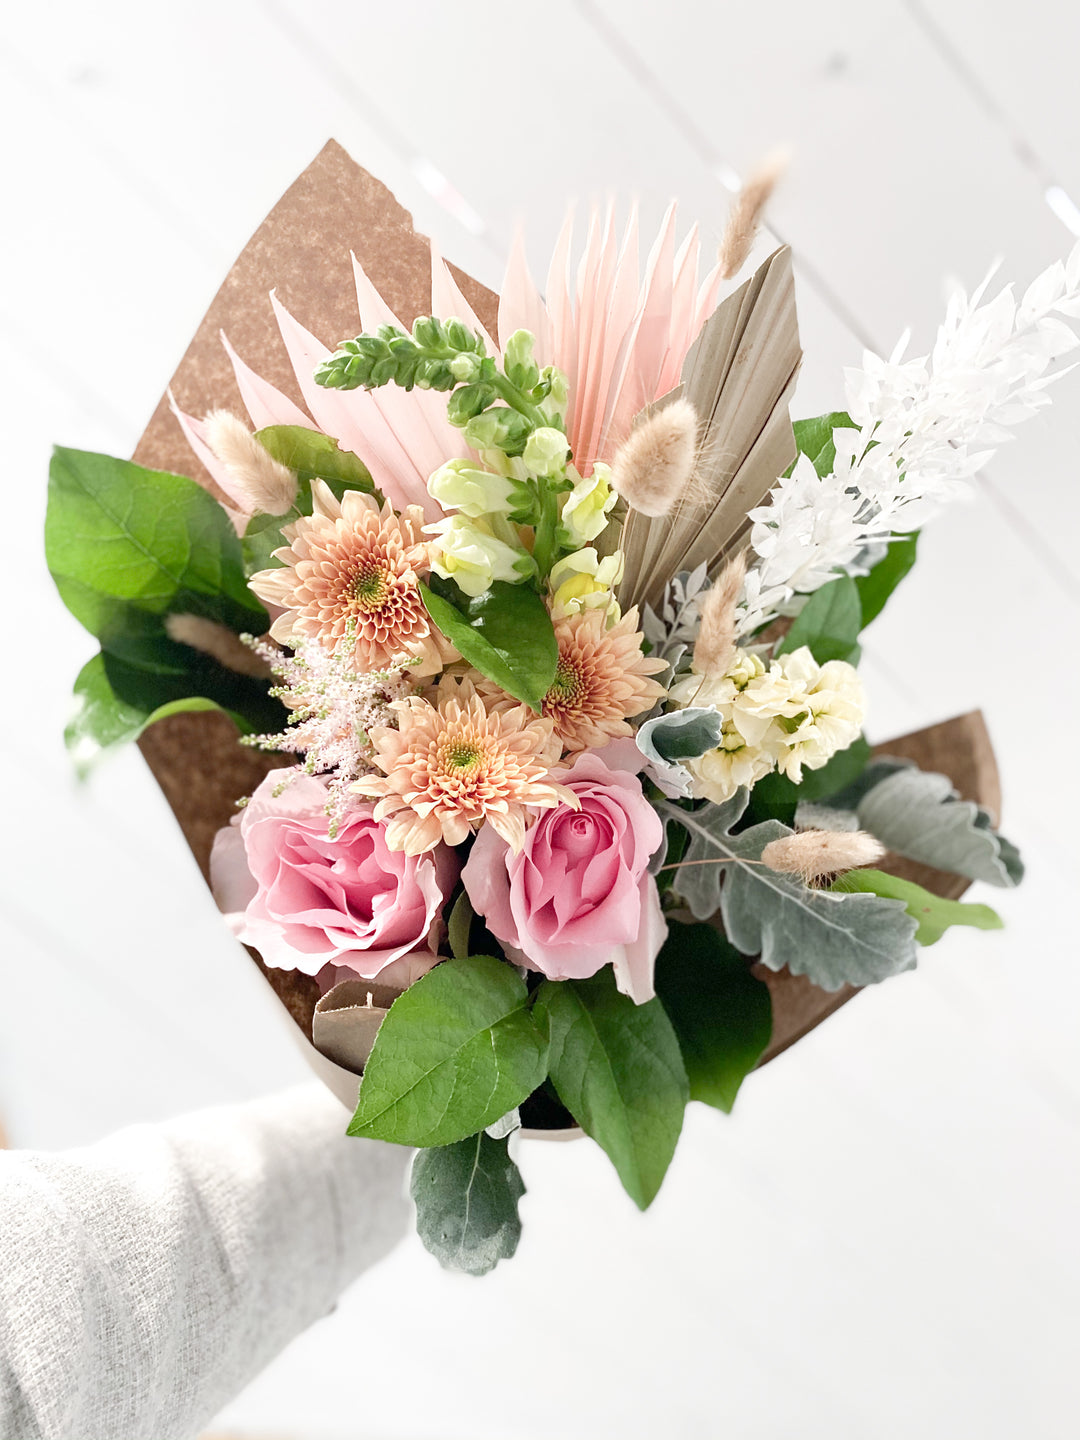 Fresh Floral Posy: October 21st - 24th, 2020